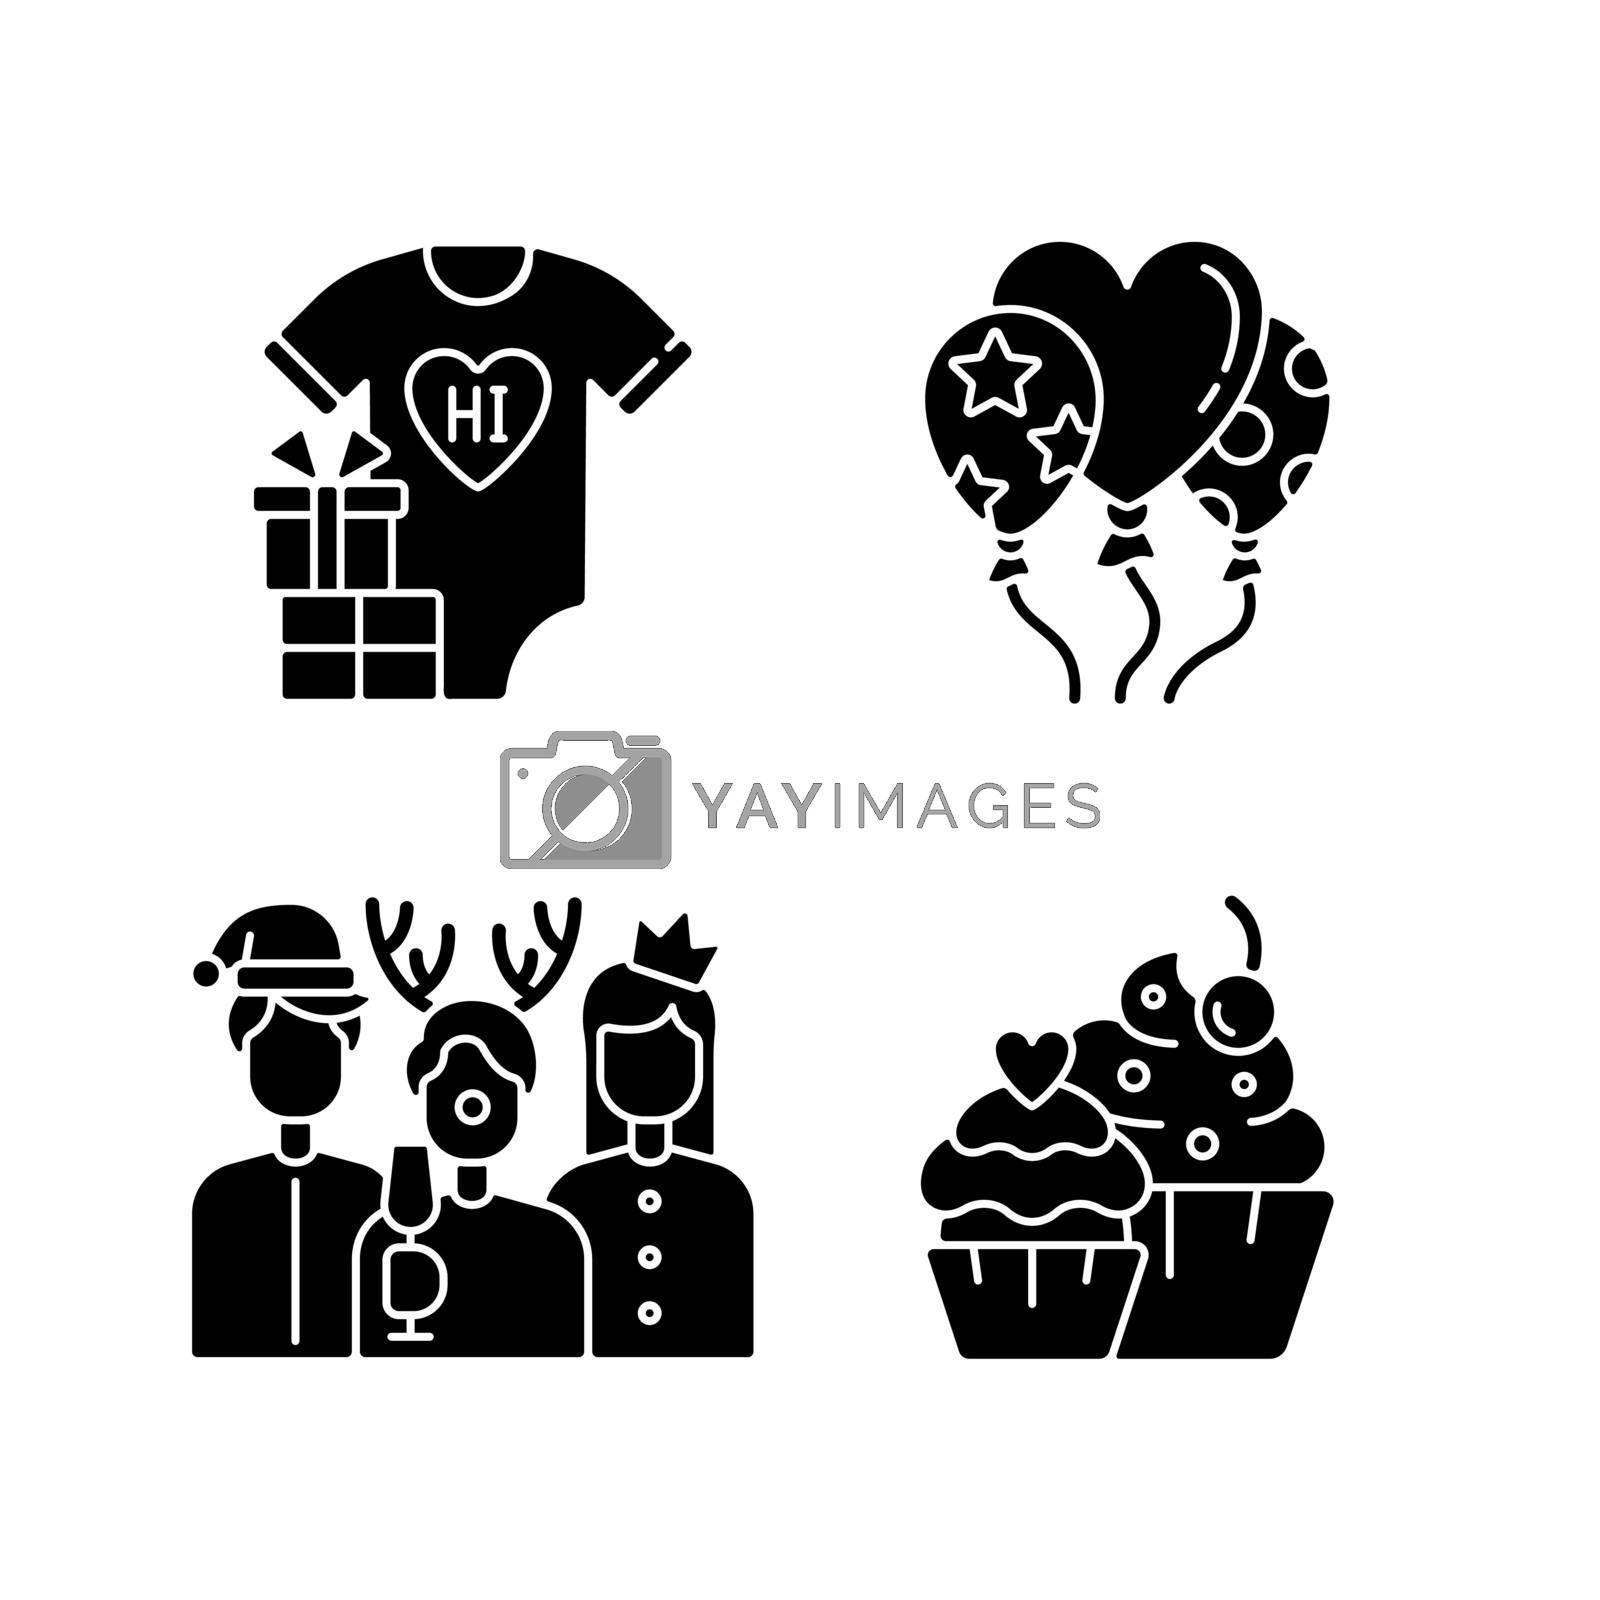 Family birthday celebration black glyph icons set on white space. Baby shower. Balloons for decoration. Christmas party with coworkers and friends. Silhouette symbols. Vector isolated illustration